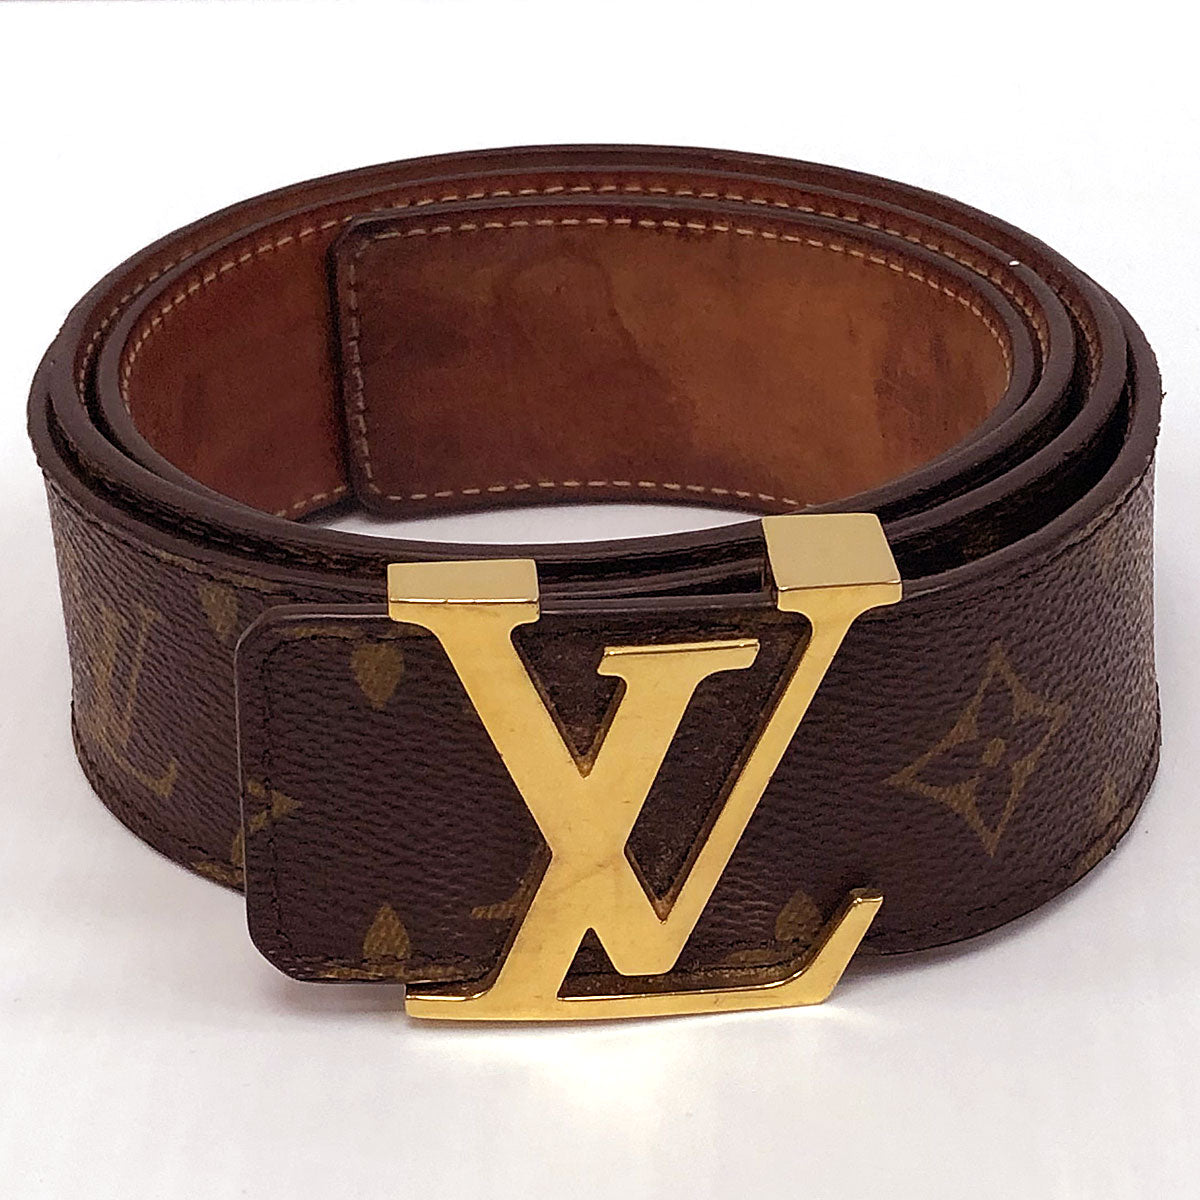 Anyone ever seen this belt can give some info on it : r/Louisvuitton